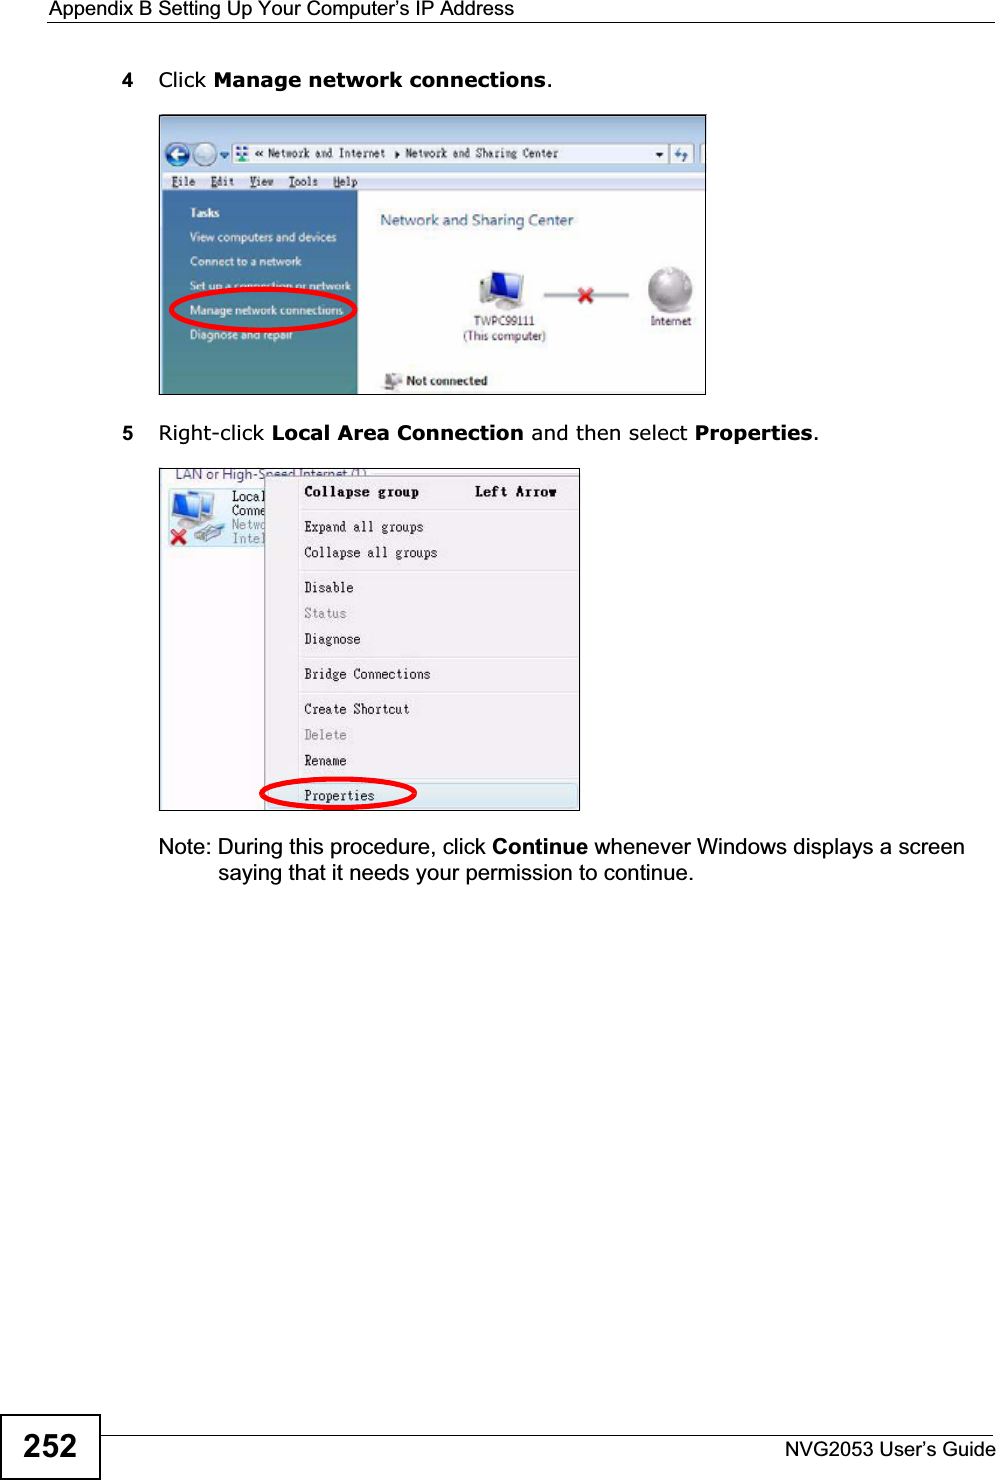 Appendix B Setting Up Your Computer’s IP AddressNVG2053 User’s Guide2524Click Manage network connections.5Right-click Local Area Connection and then select Properties.Note: During this procedure, click Continue whenever Windows displays a screen saying that it needs your permission to continue.